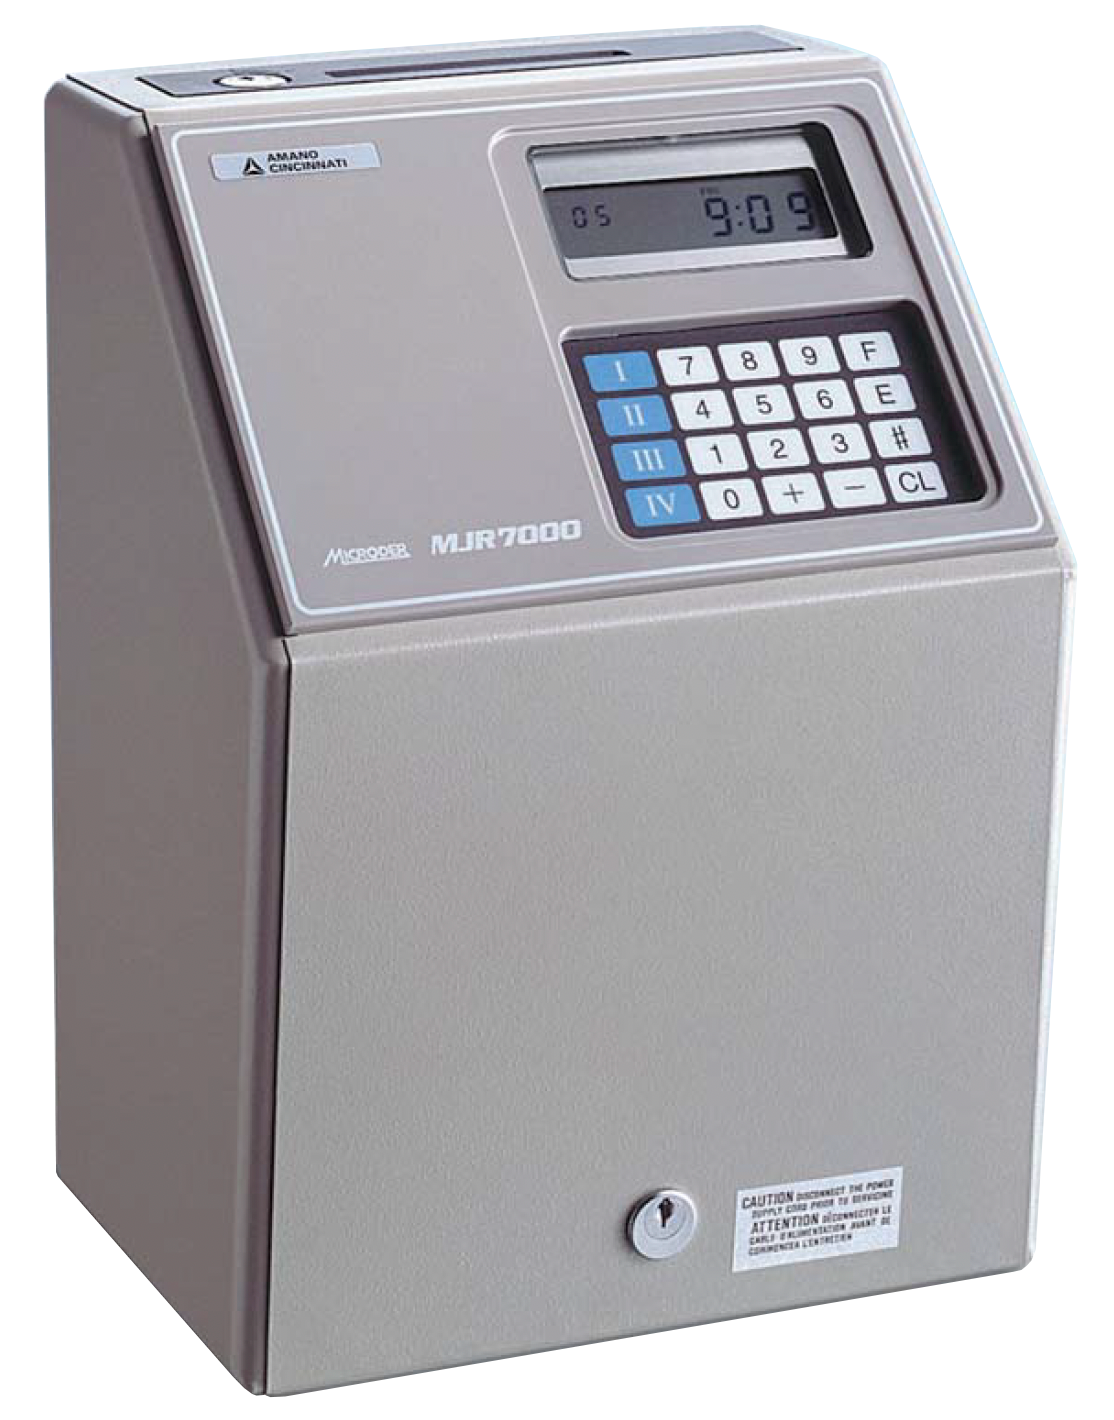 Amano MJR-7000EZ Heavy Duty Calculating Time Clock with 3 Shifts